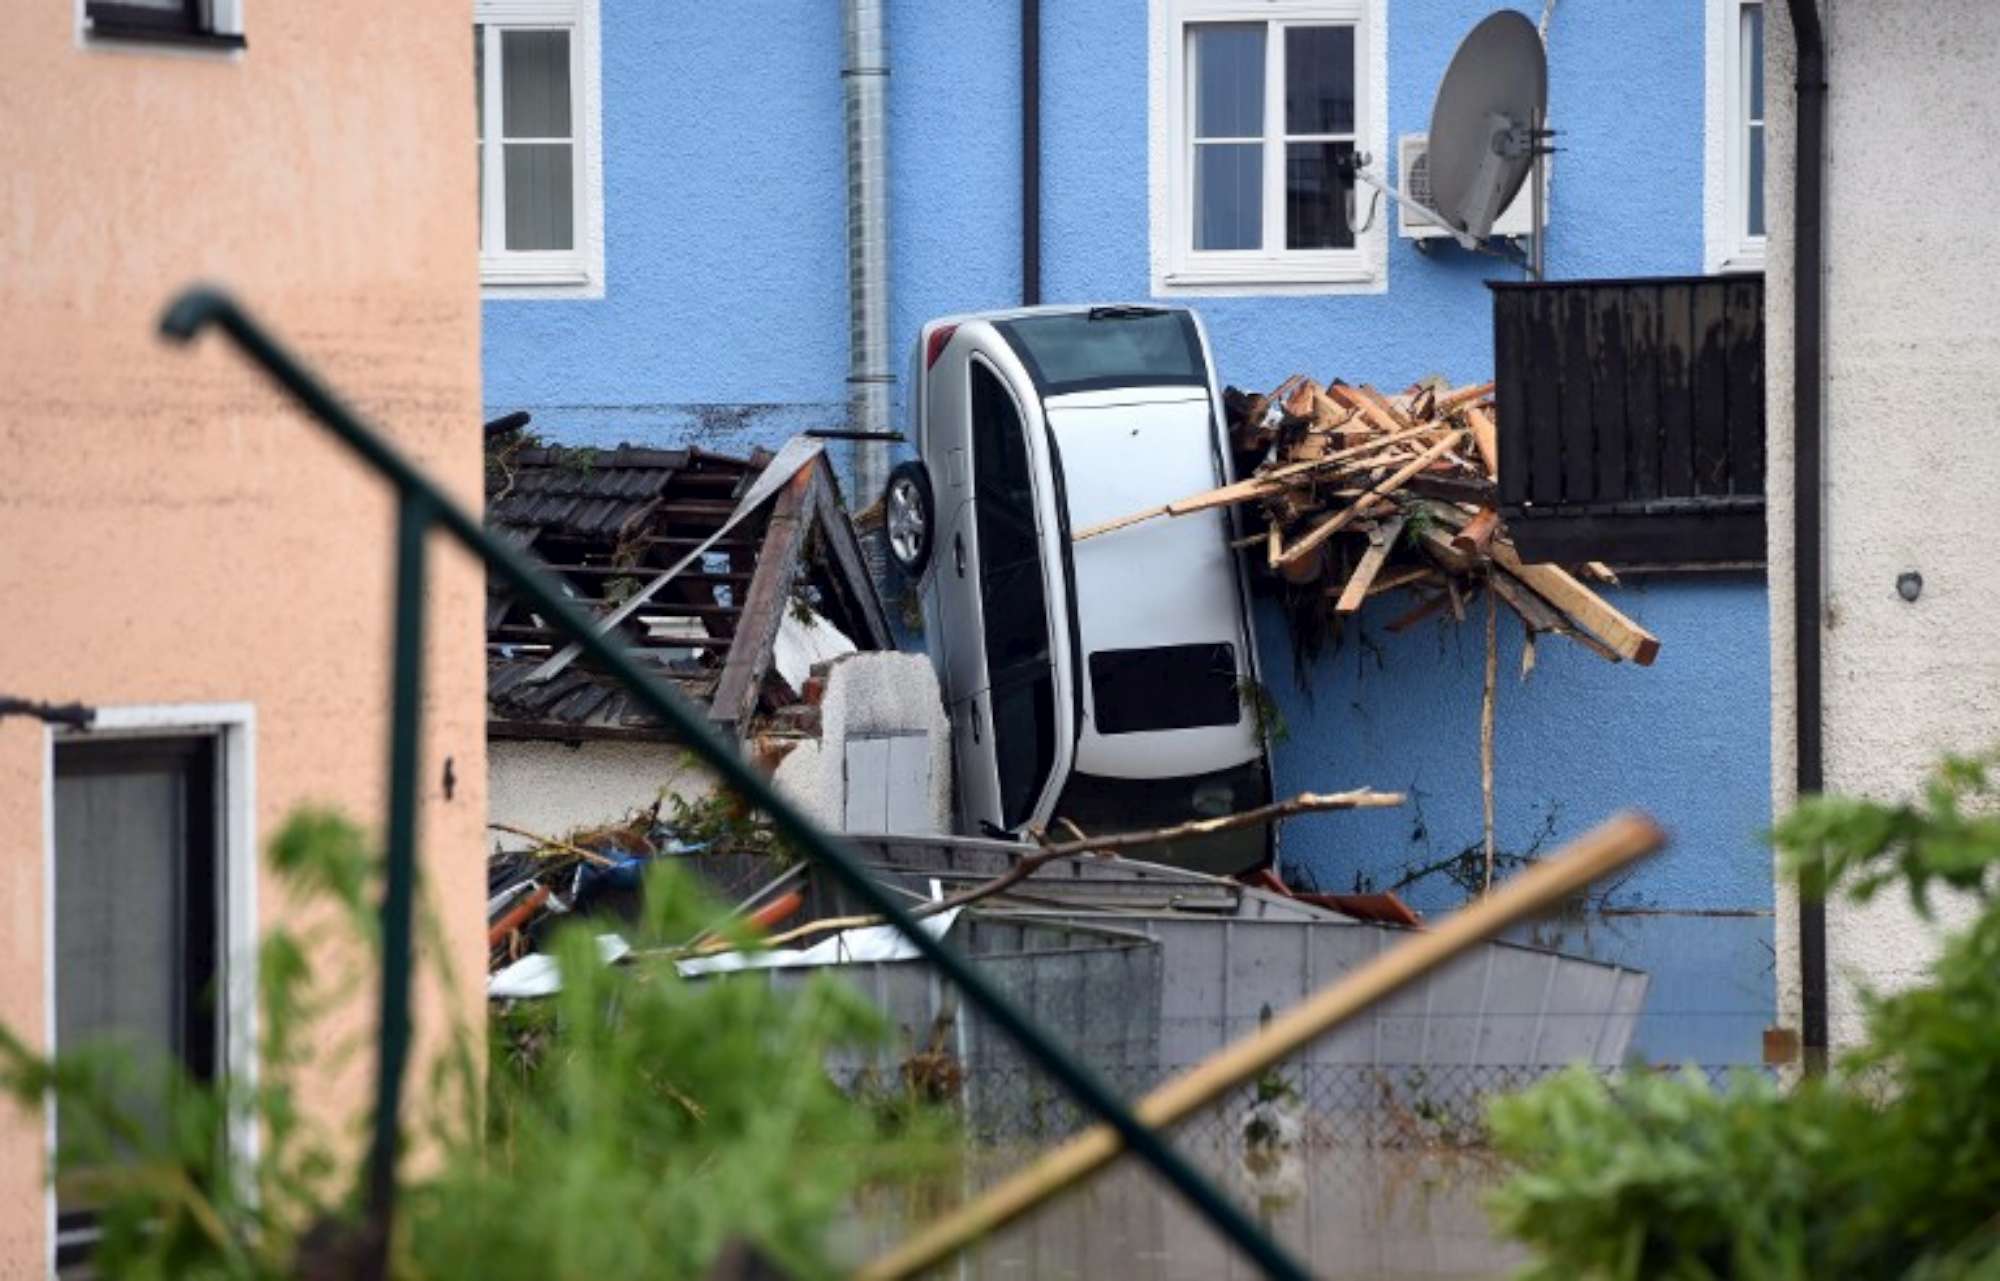 A car that was pressed against a facade by the floods is seen in Simbach am Inn, southern Germany, on June 1, 2016.  Incessant rain in regions of Germany, France and Austria led to flash flooding, forcing residents to seek refuge on rooftops and stranding hundreds of pupils at their school overnight, authorities said. / AFP PHOTO / DPA / Tobias Hase / Germany OUT